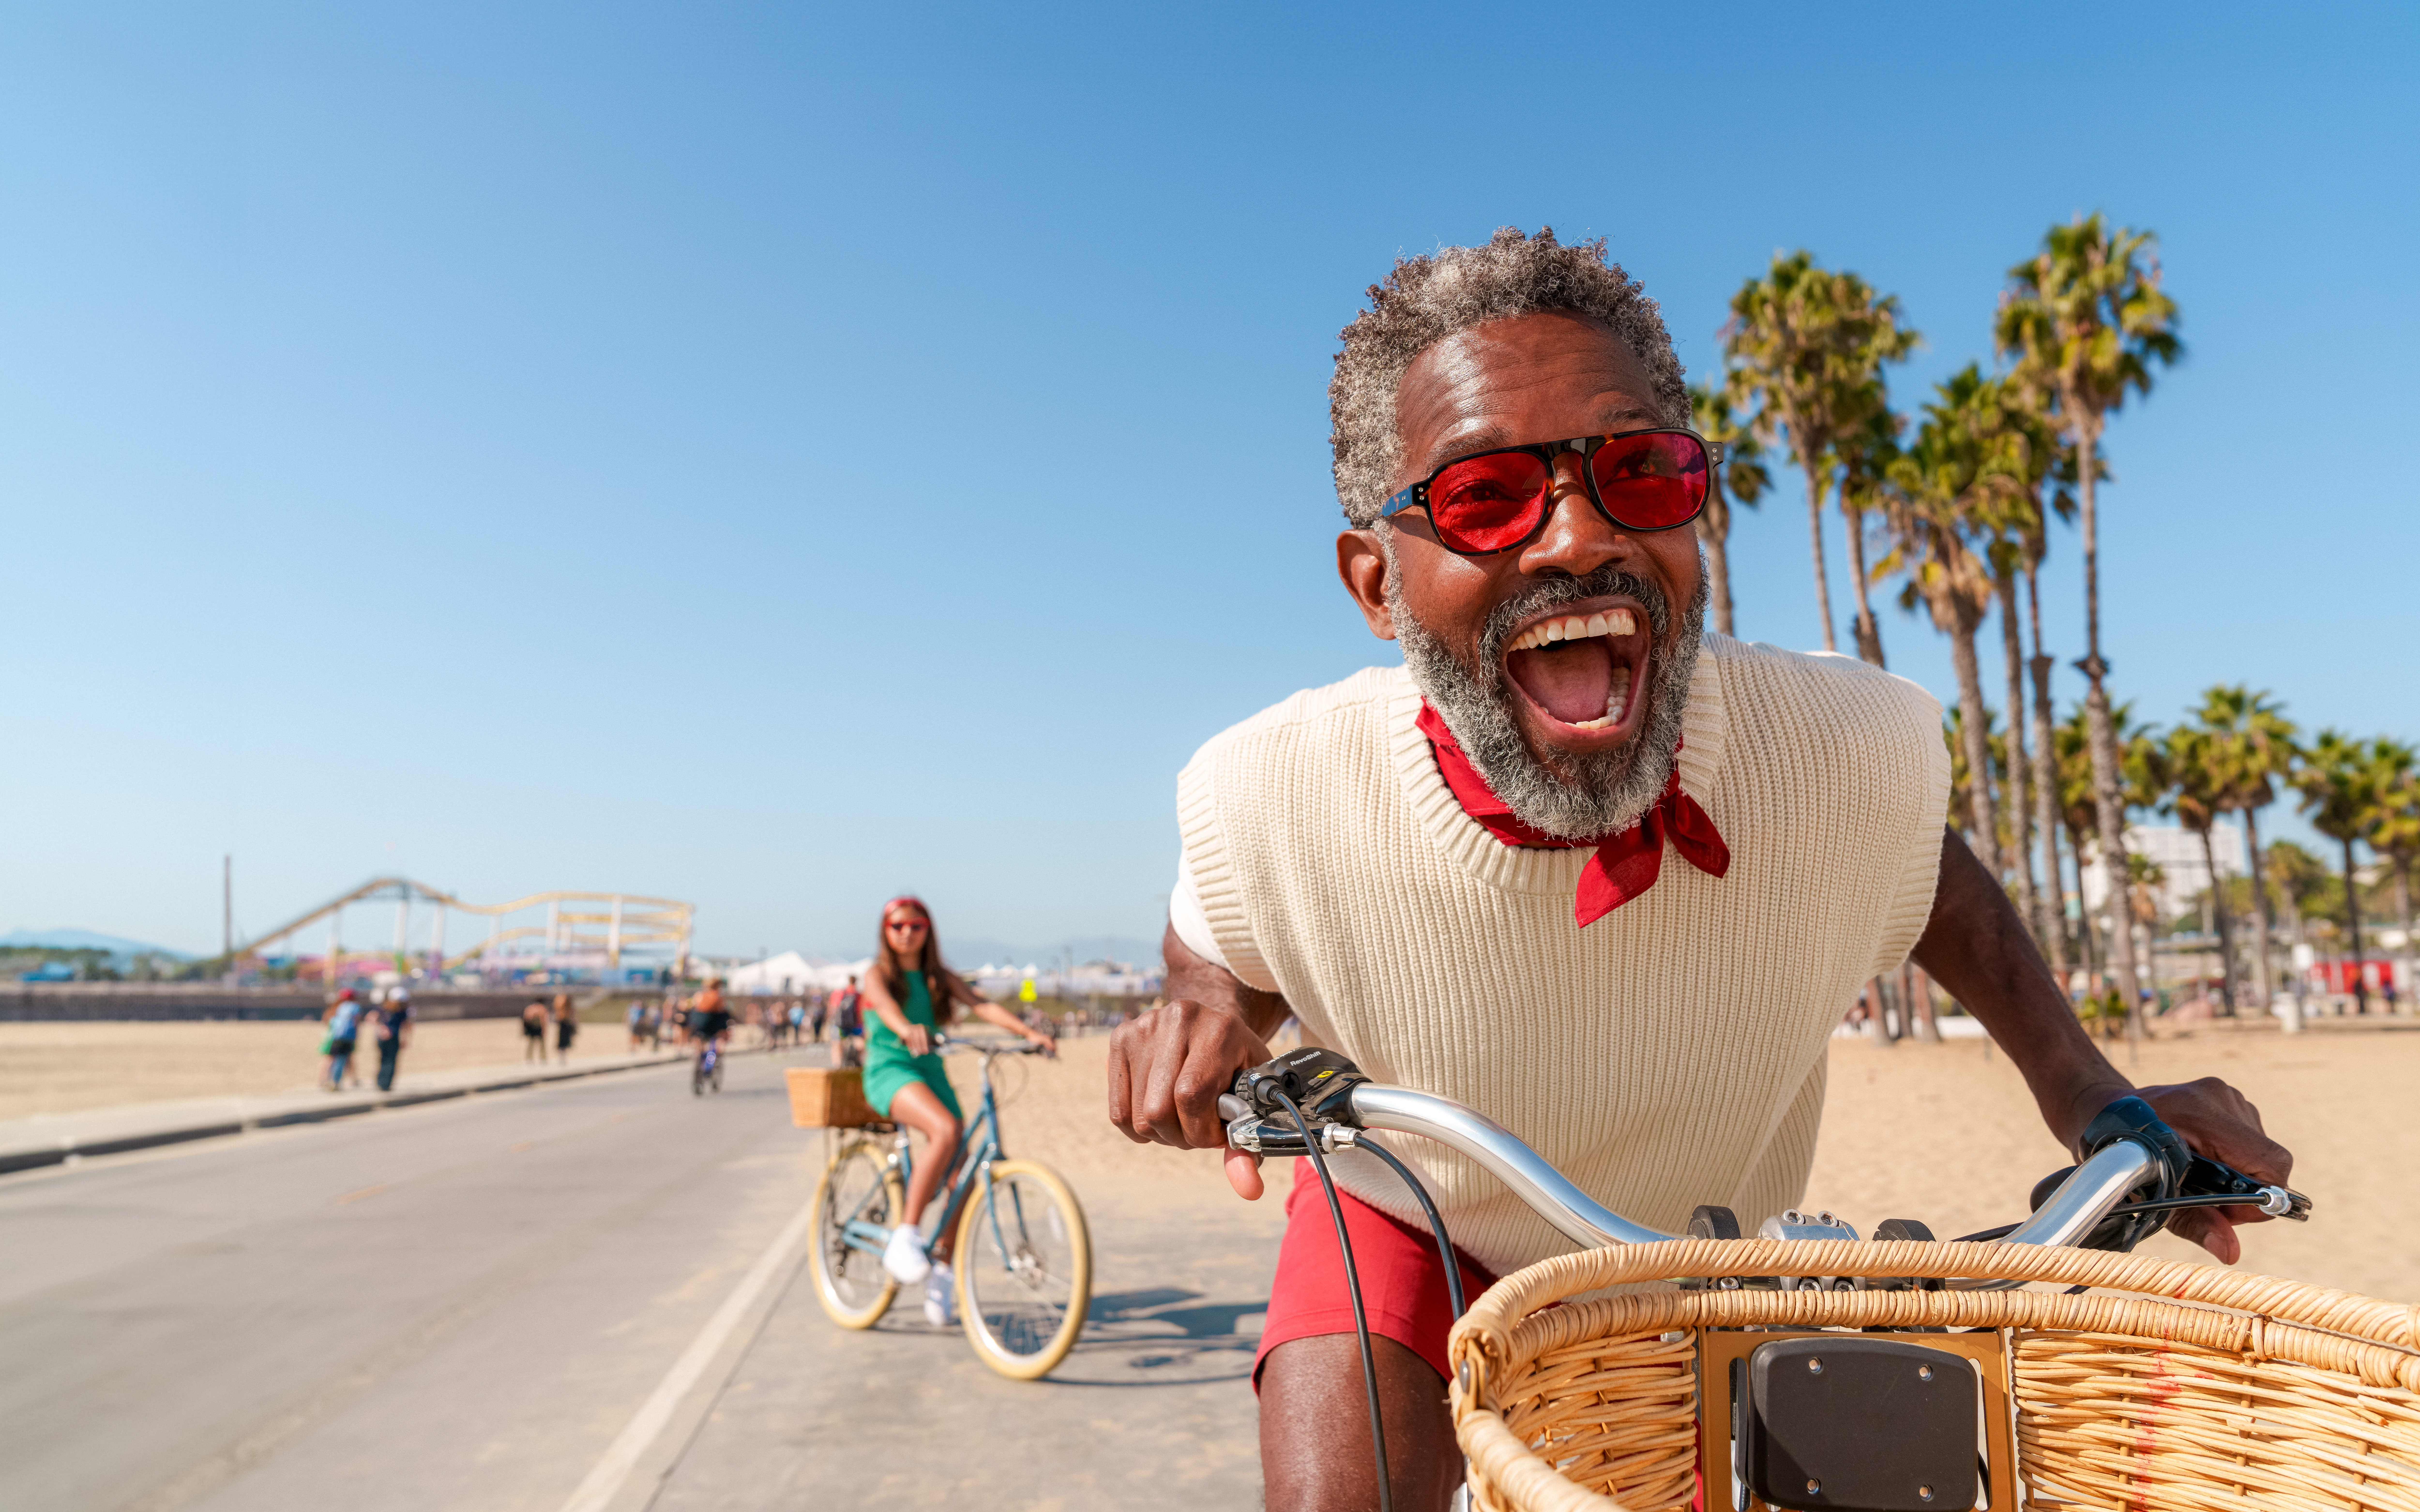 An image of a smiling man riding a bike on holiday